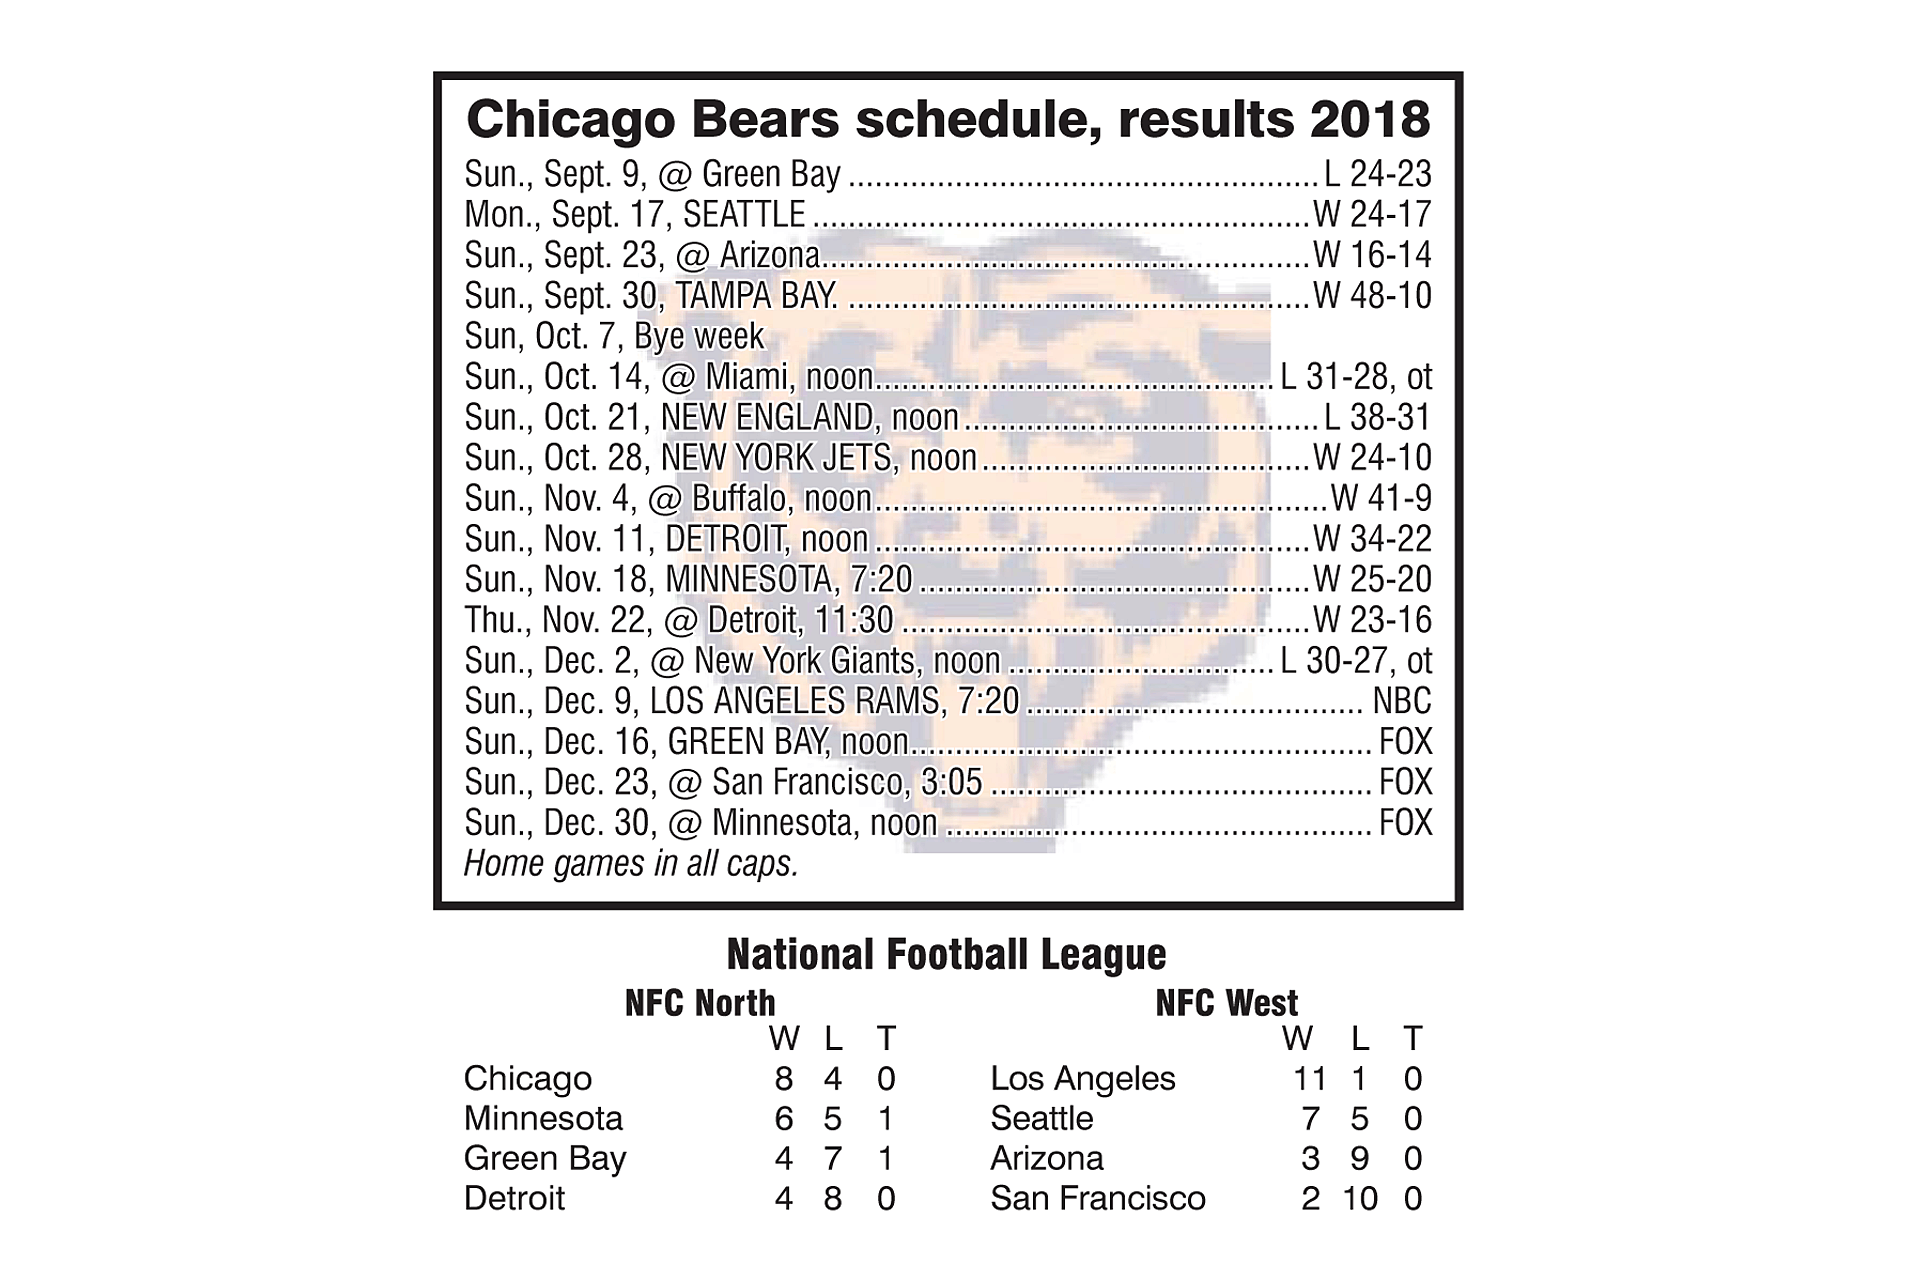 Chicago Bears 2018 schedule and results through December 2, 2018